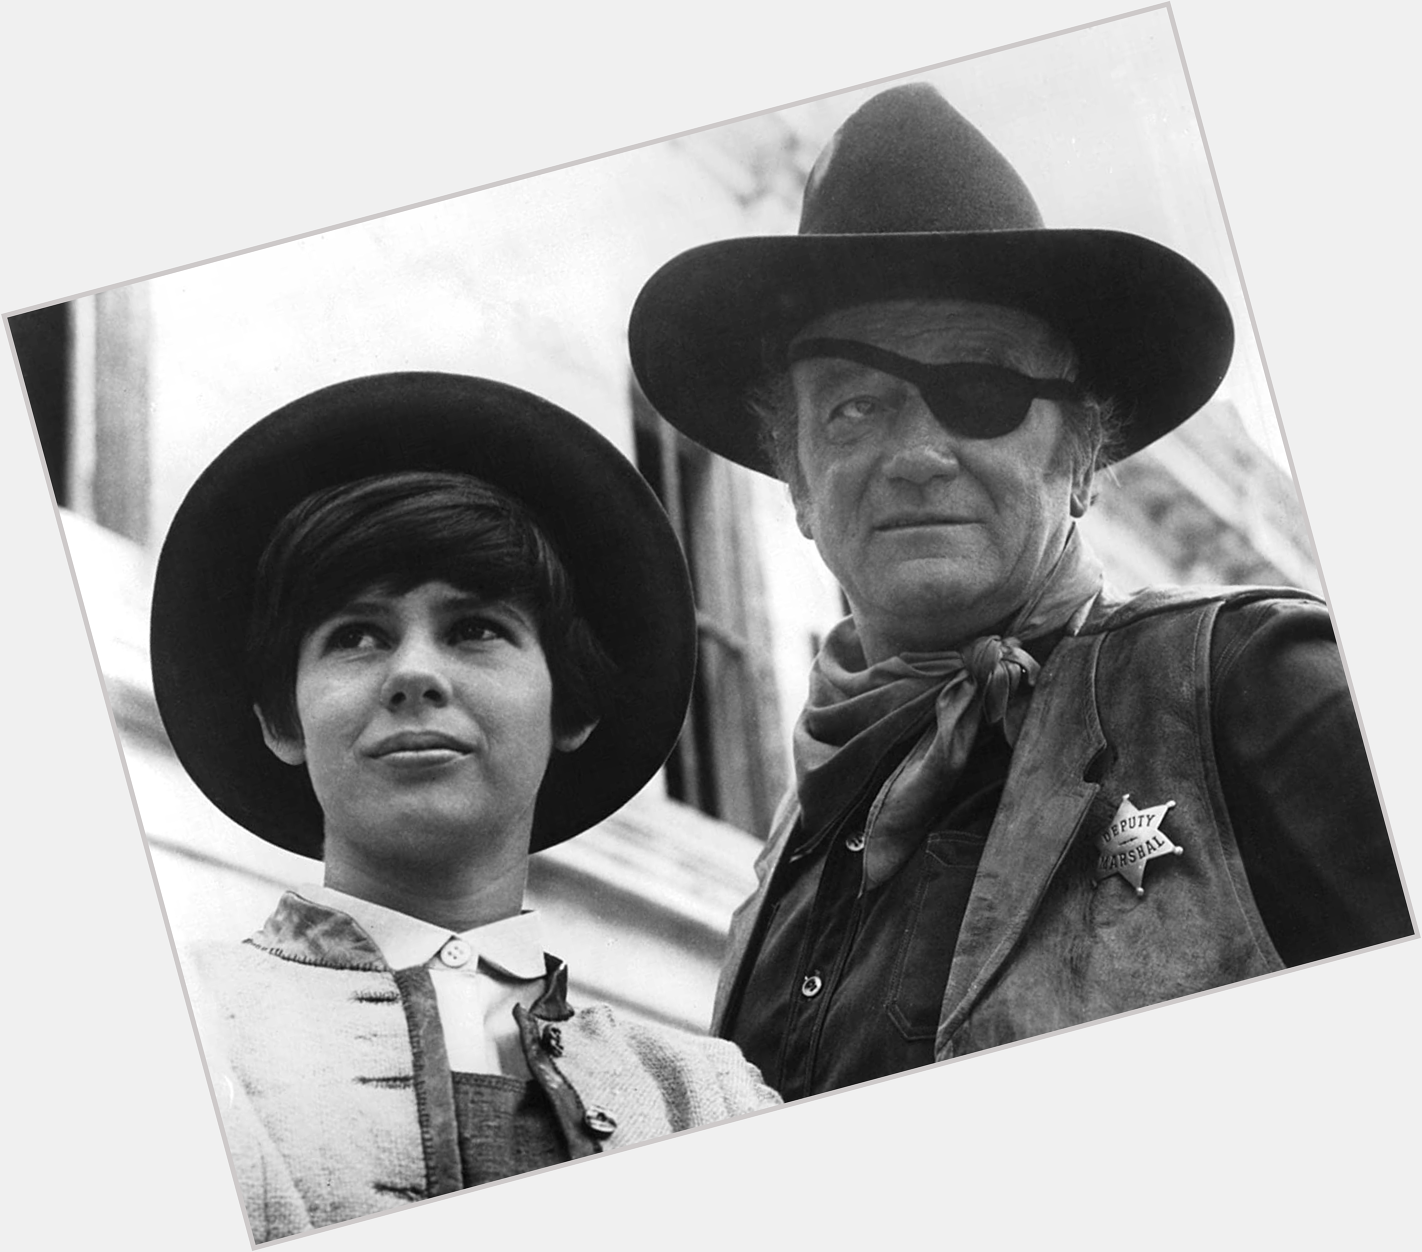 Happy birthday to Kim Darby, seen here in \"True Grit\" from 1969 